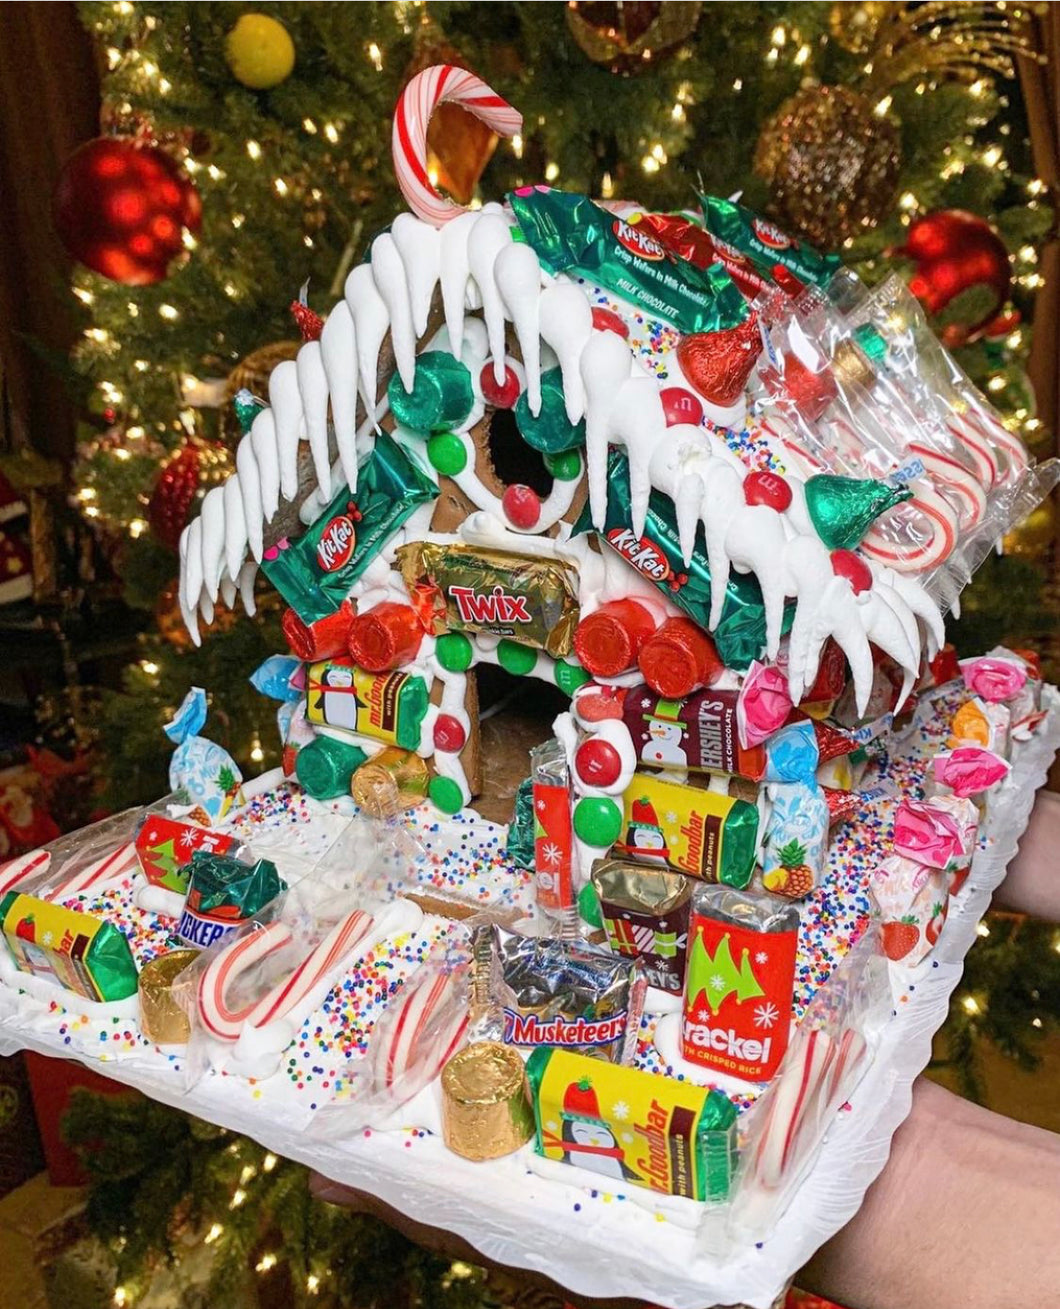 Decorated Gingerbread house